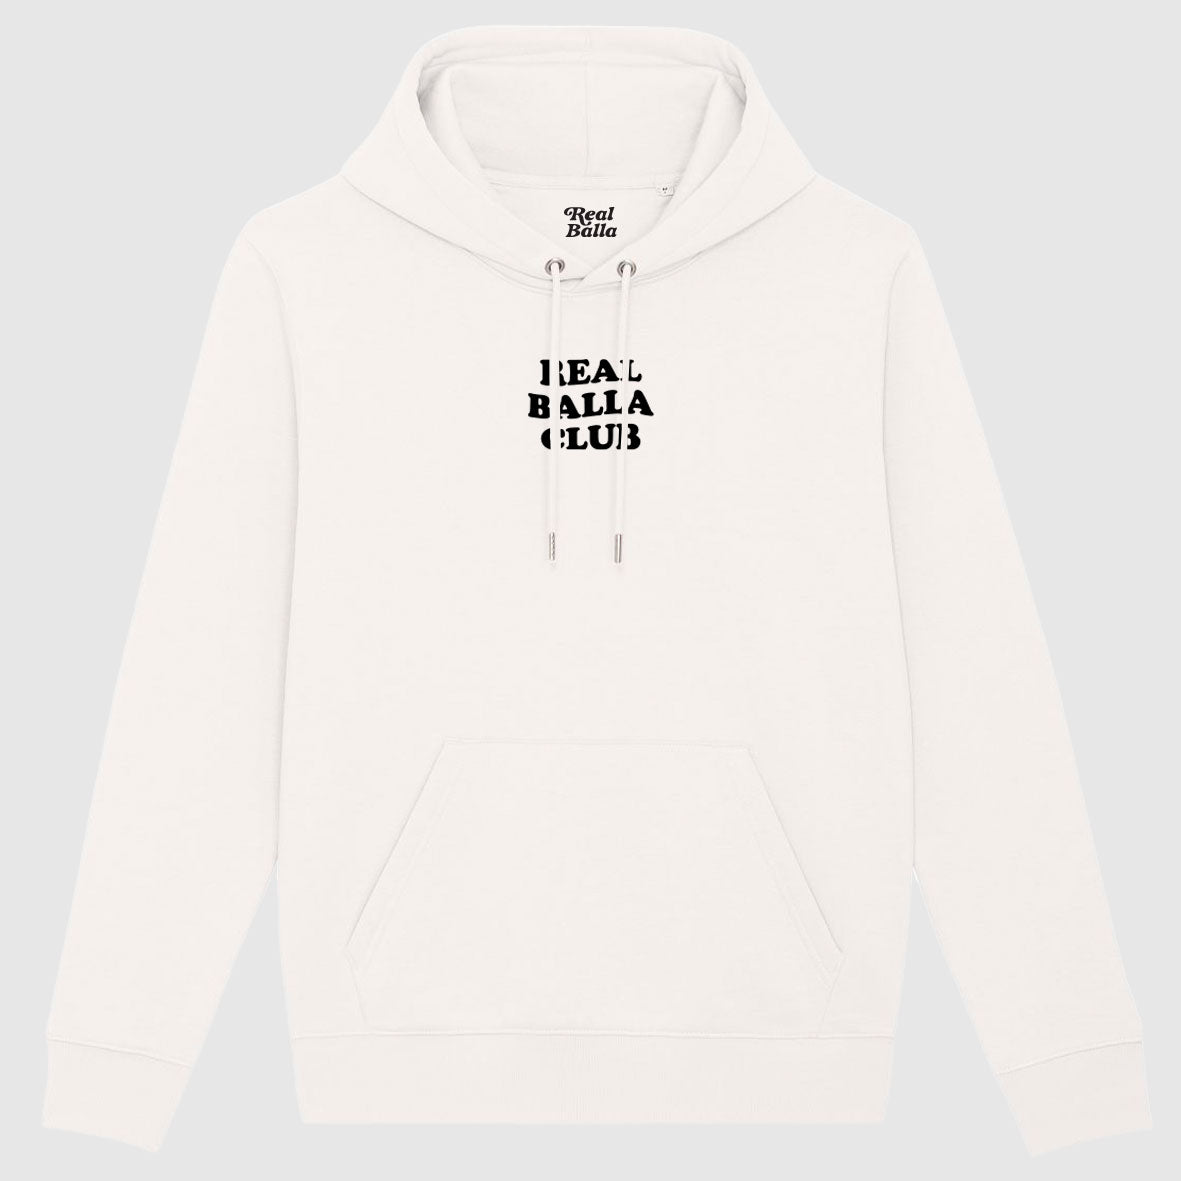 Hoodie Good cards only - Off White